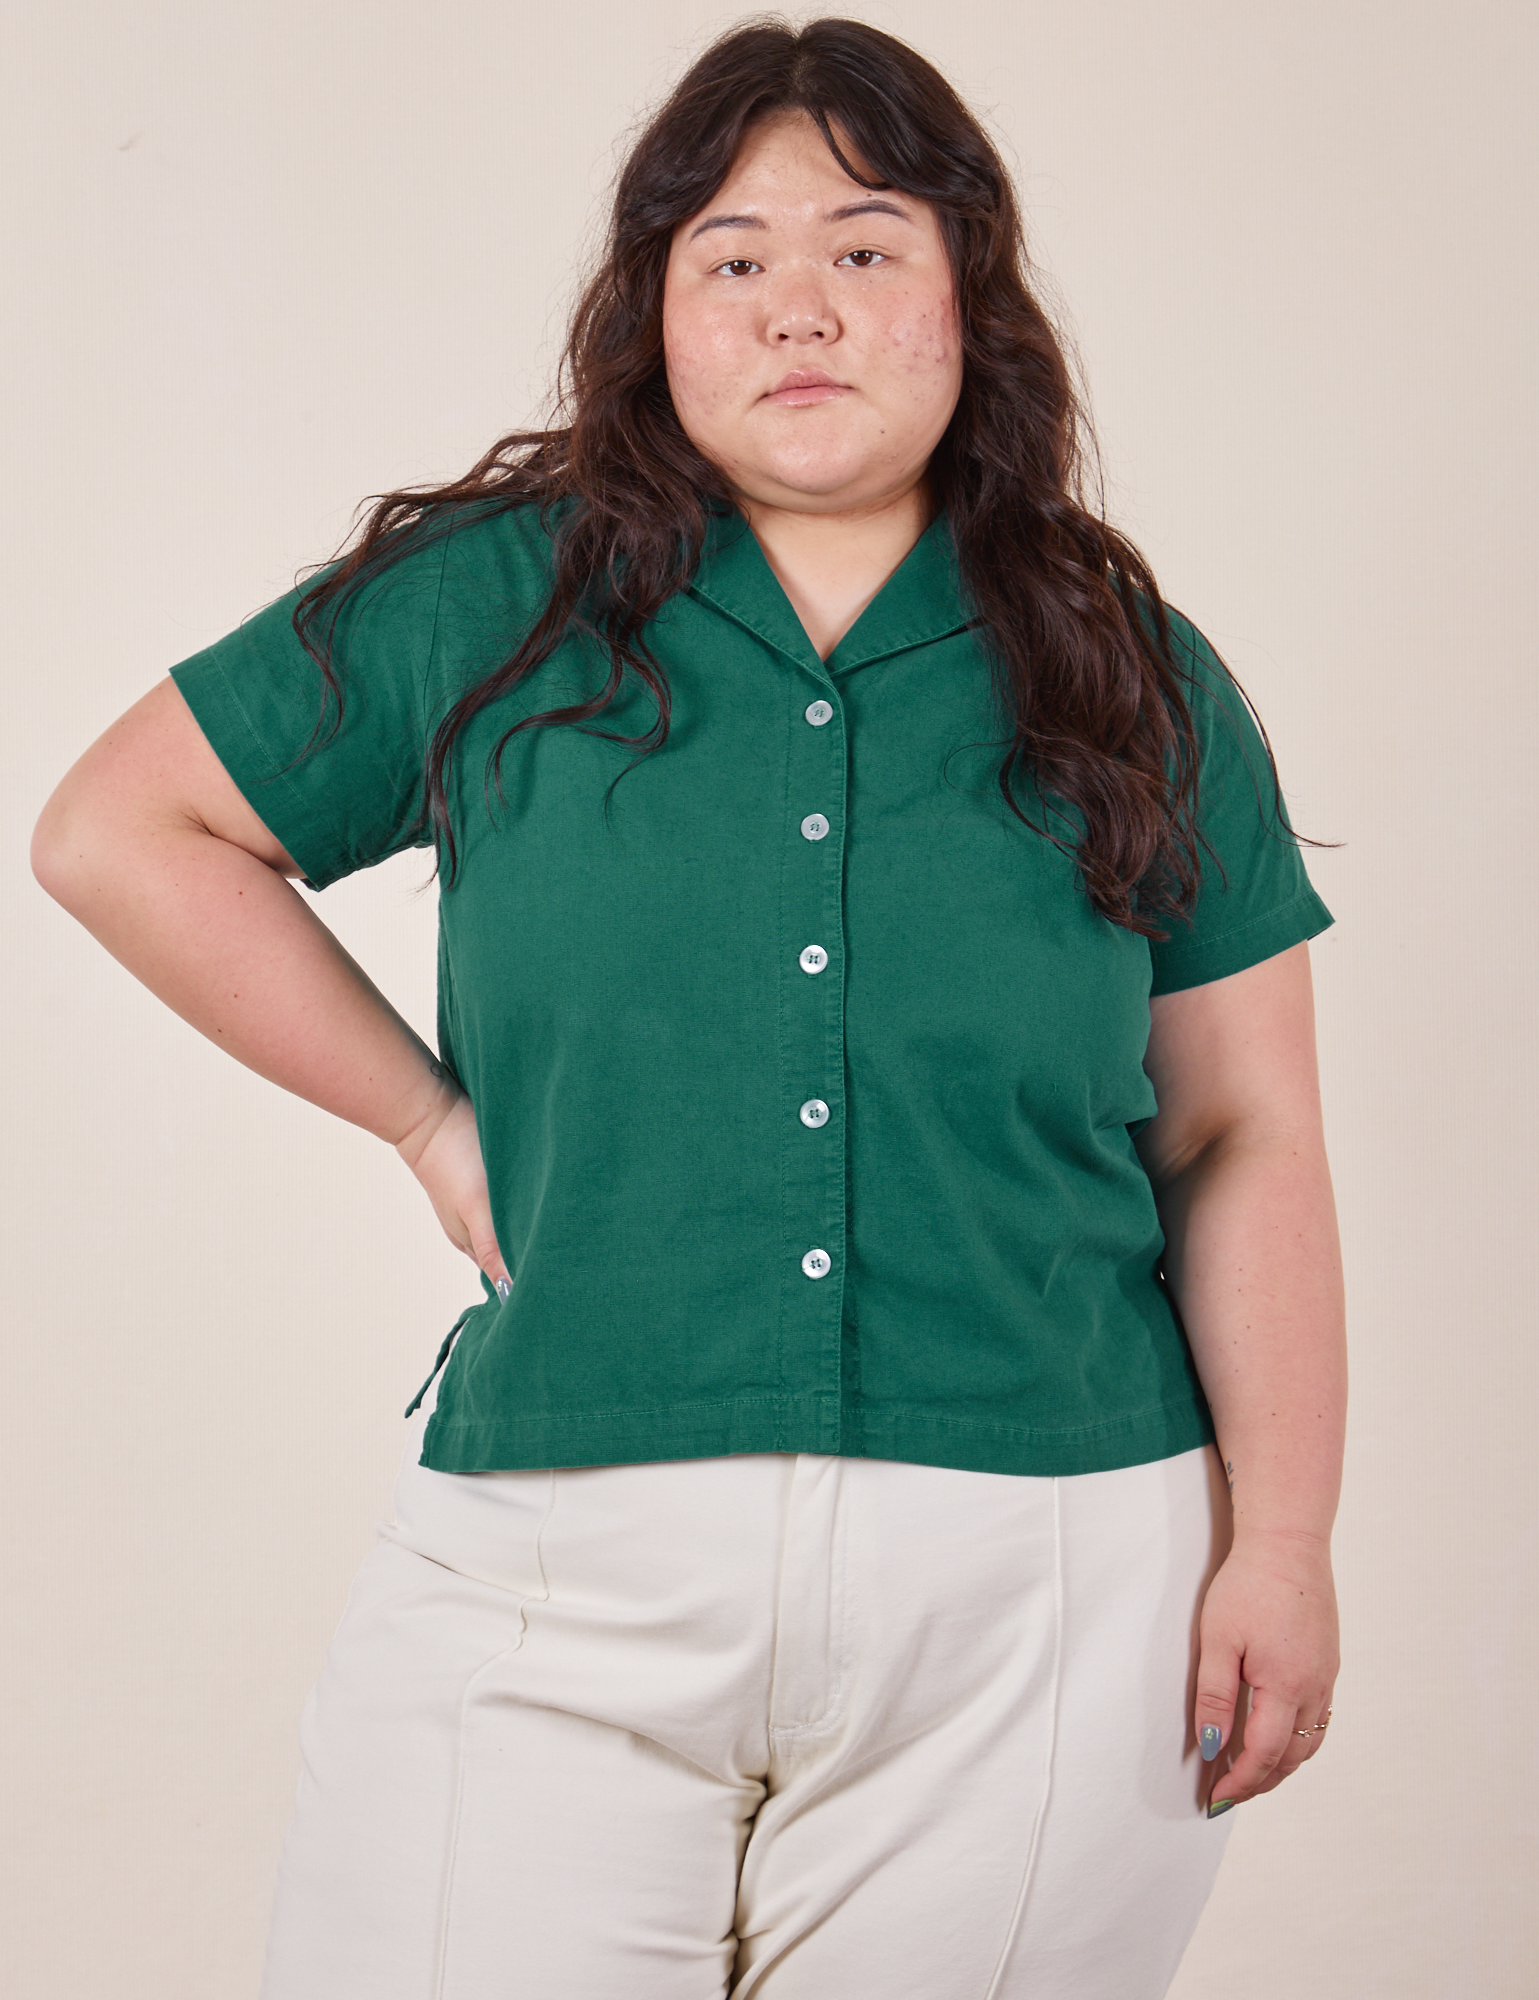 Ashley is wearing size L Pantry Button-Up in Hunter Green